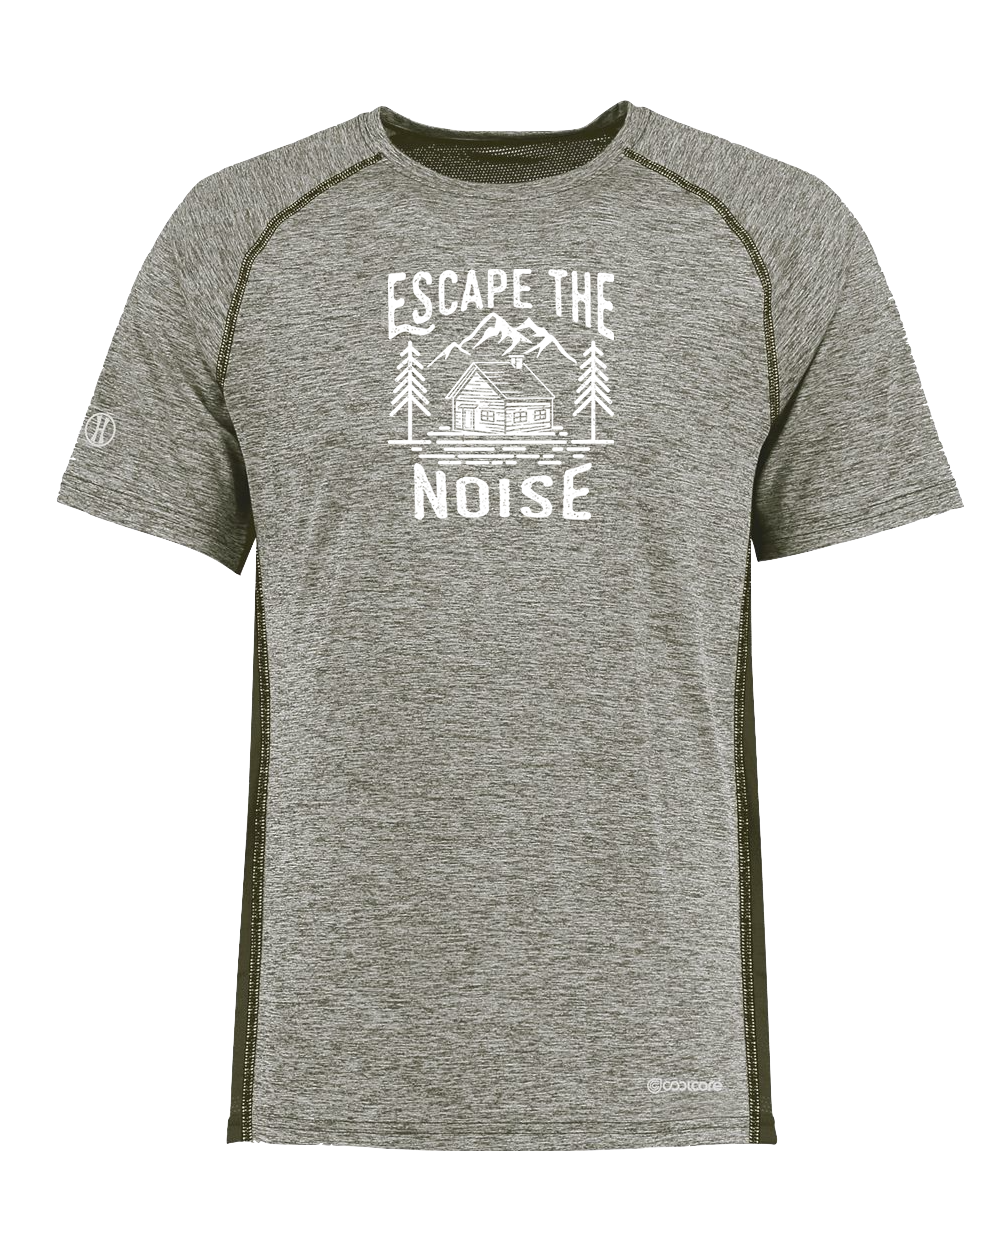 ESCAPE THE NOISE Poly/Elastane High Performance T-Shirt with UPF 50+